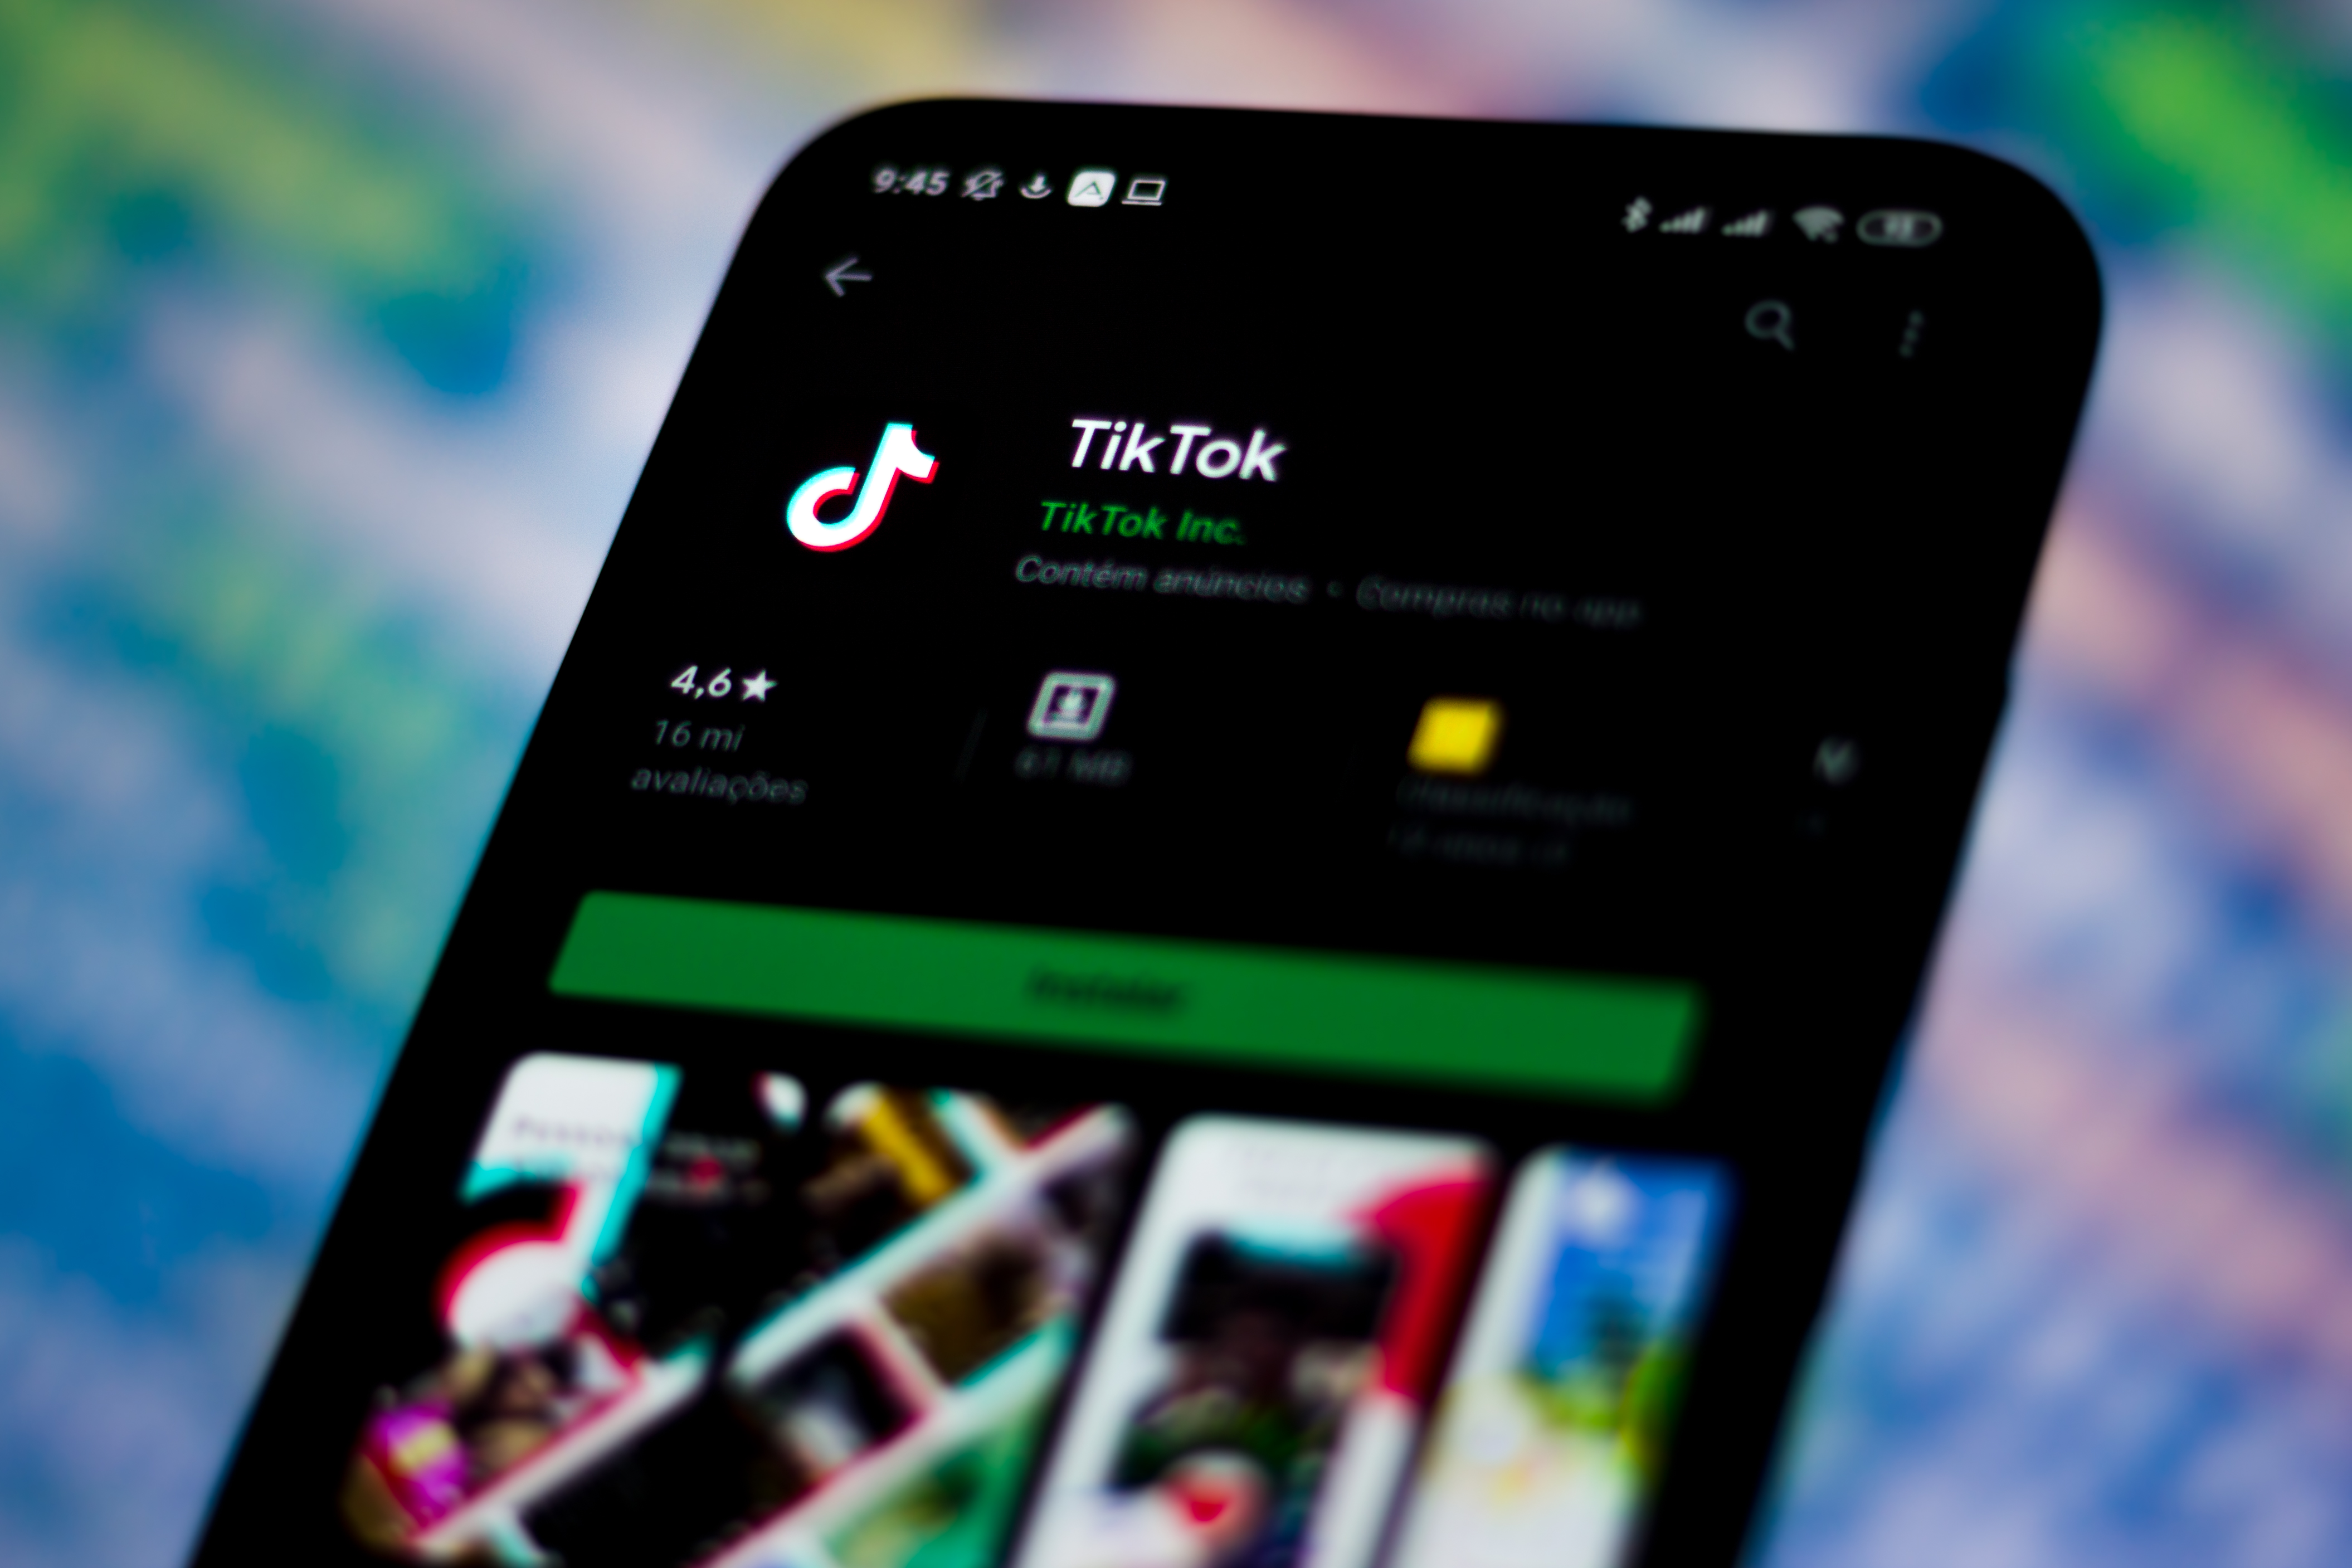 You can buy fake TikTok followers, but it might cost you your privacy - South China Morning Post